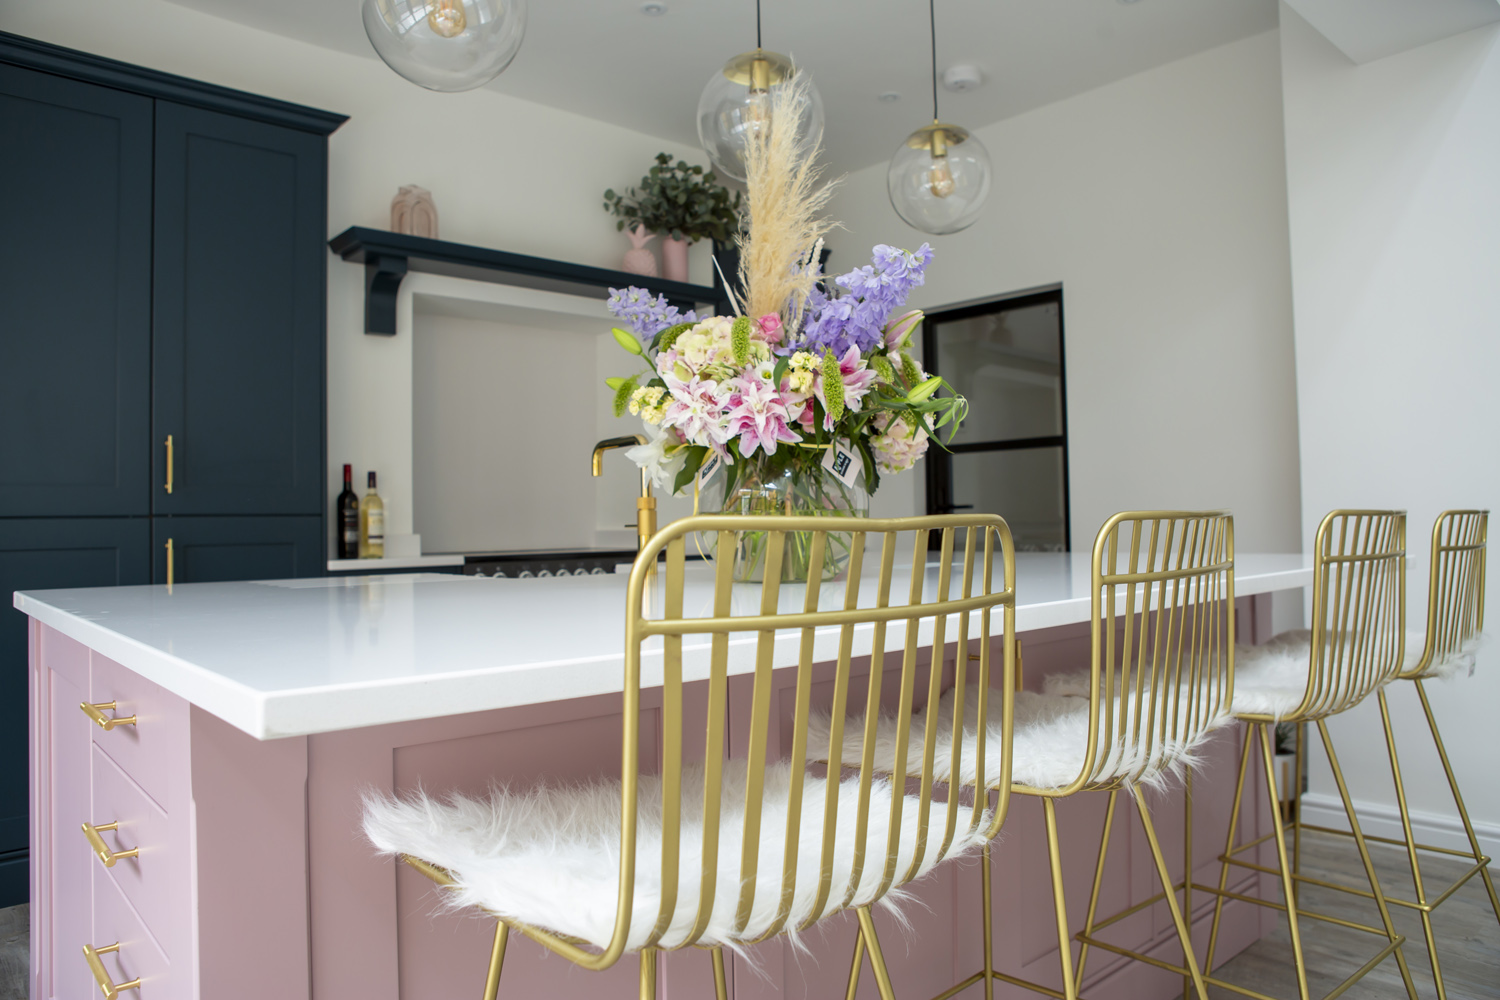 Stoneham Kitchen with gold bar stools at a dusky pink kitchen island